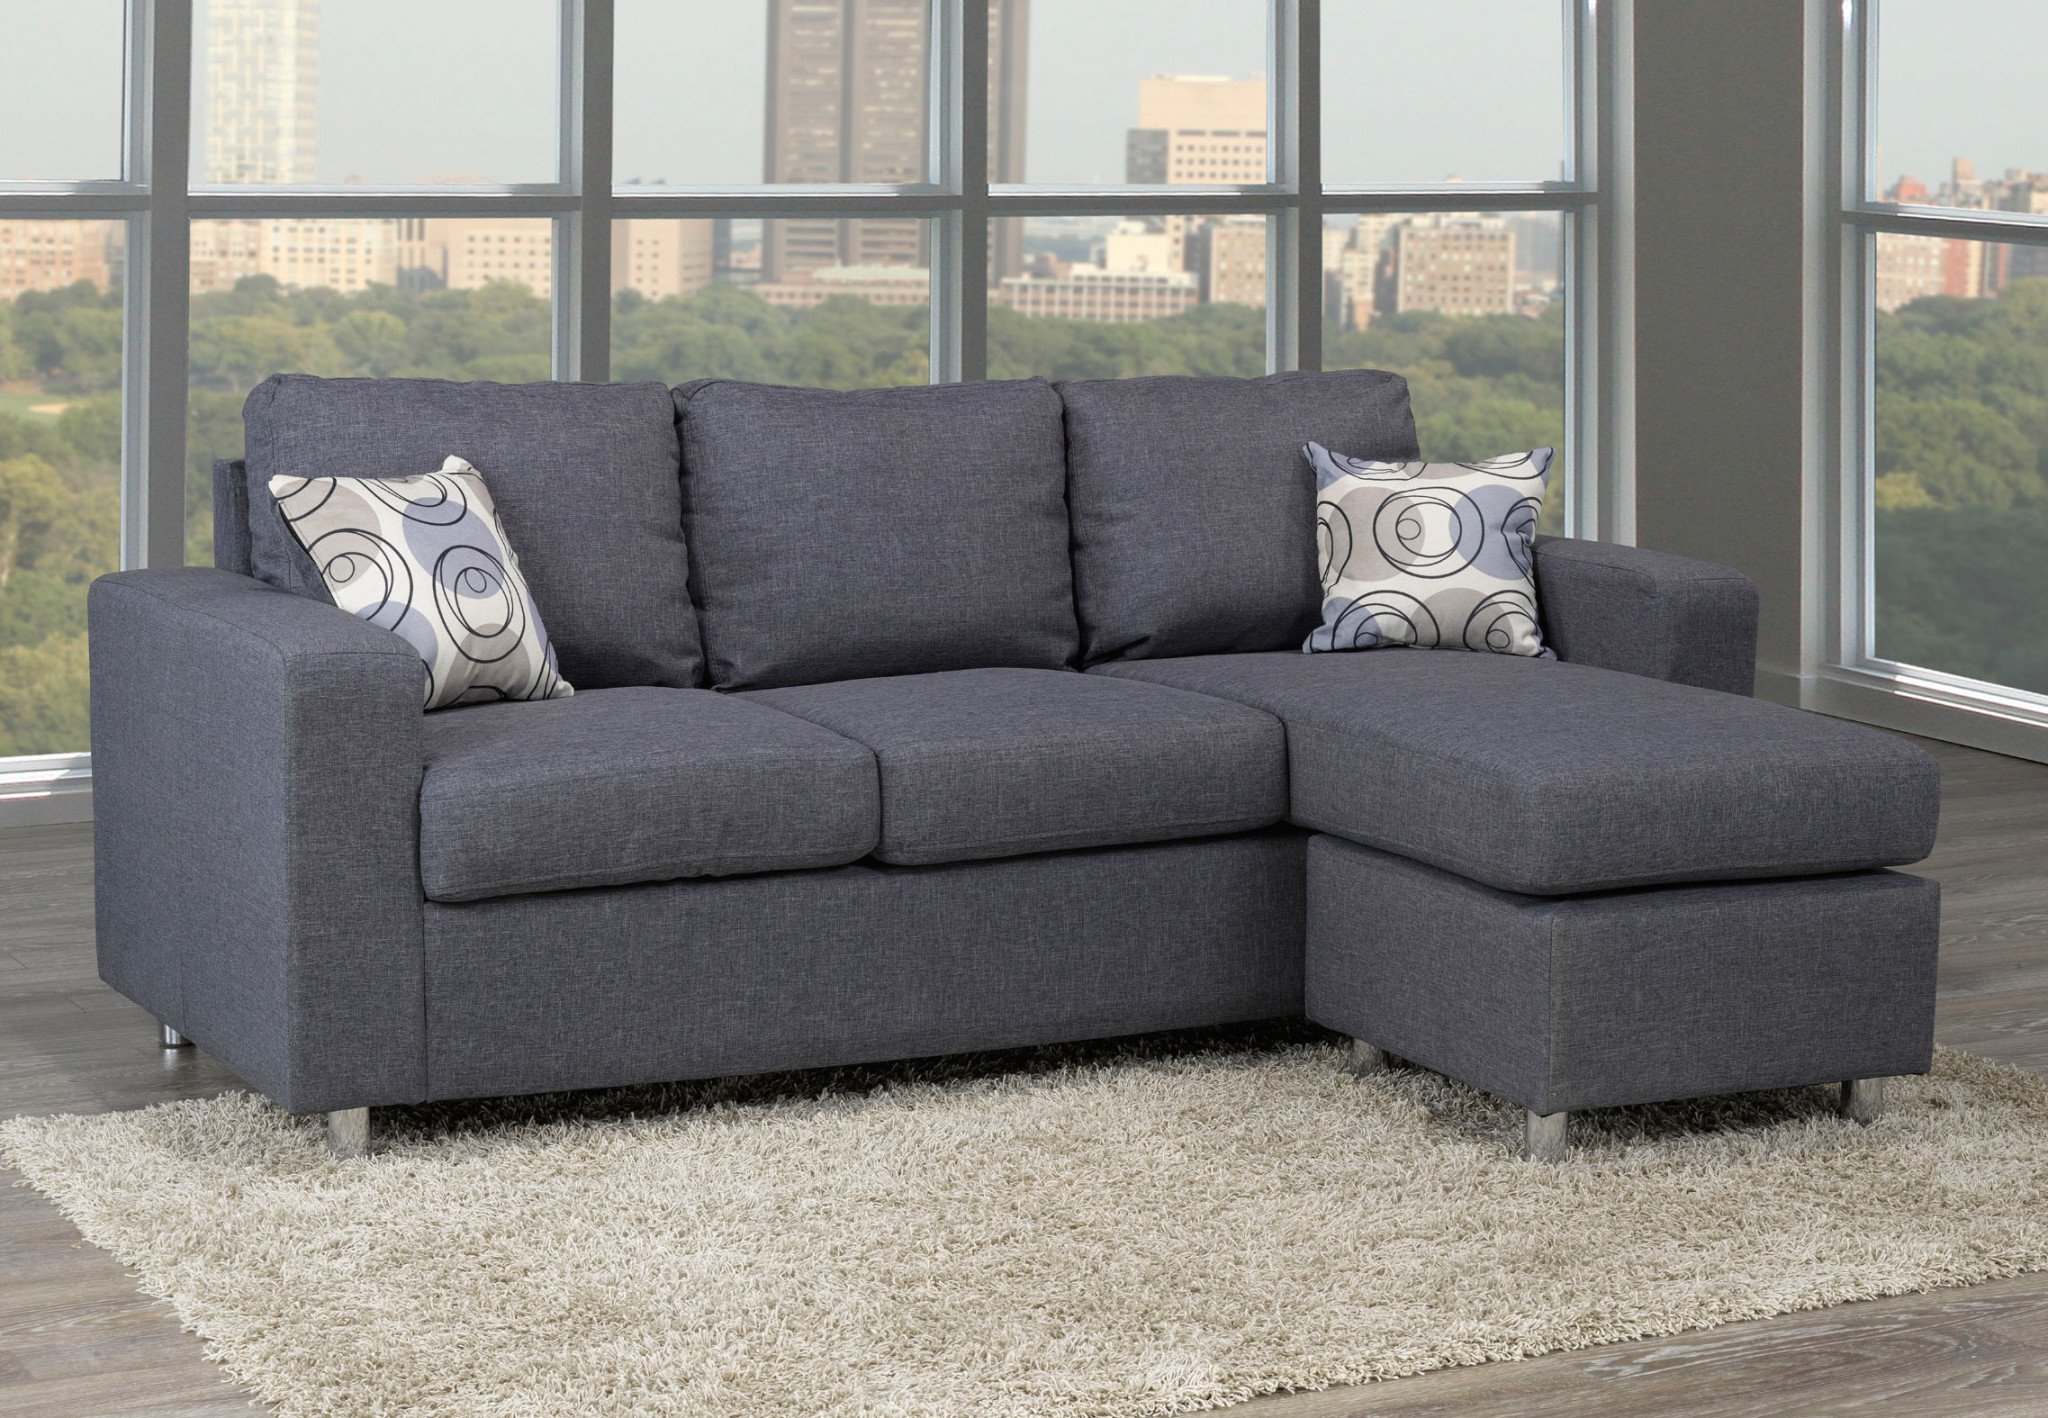 compact leather sectional sofa